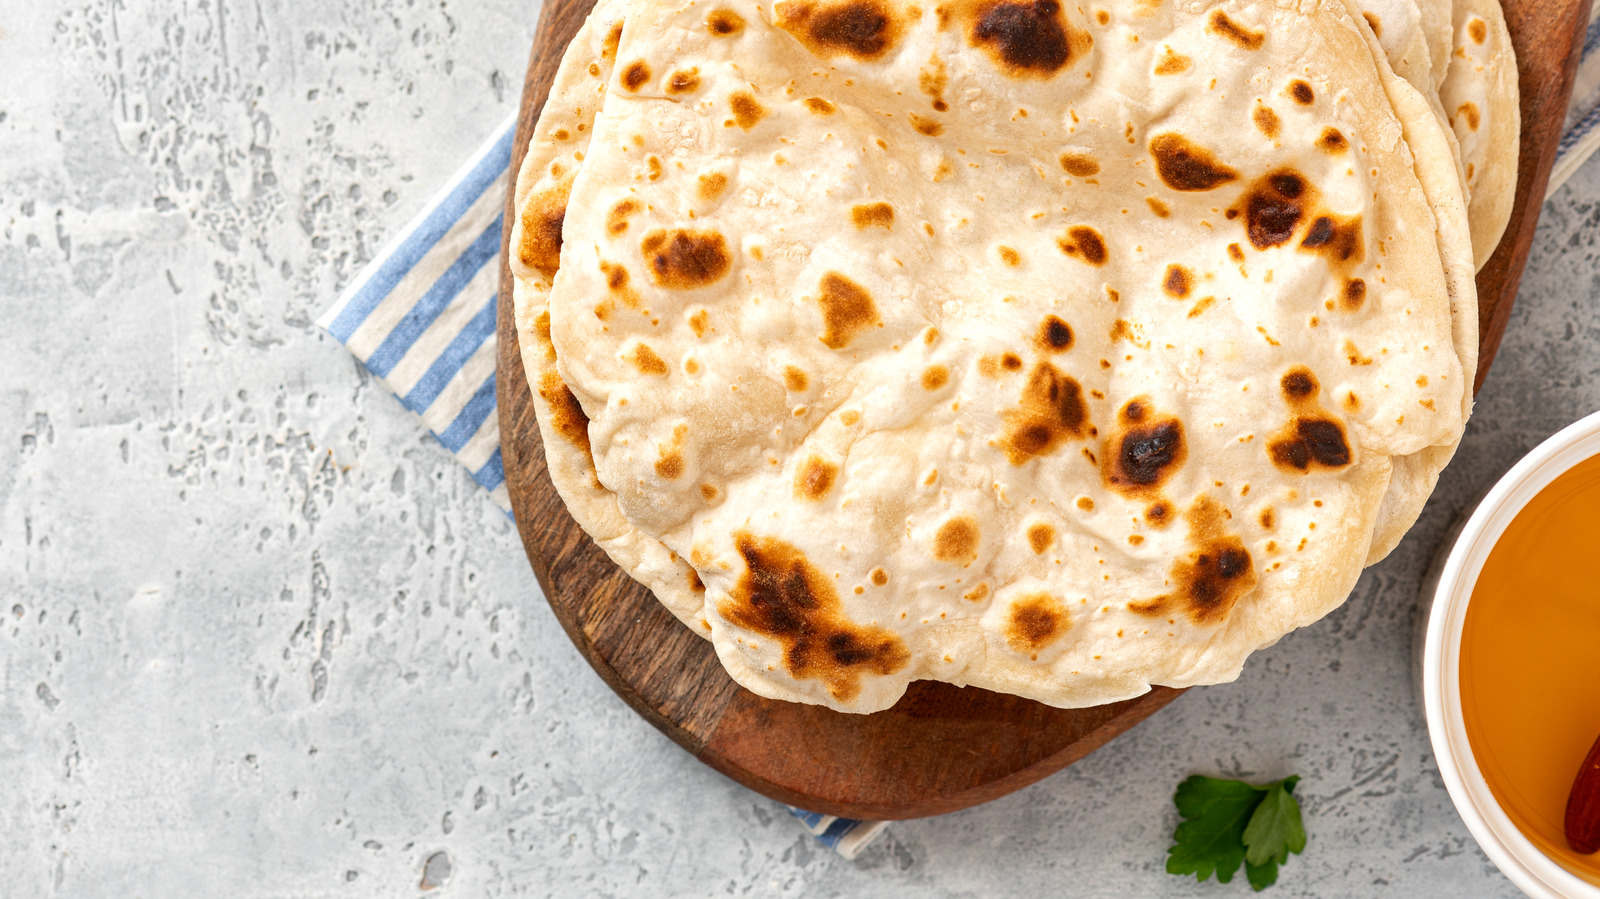 What Is Chapati And How Do You Eat It?